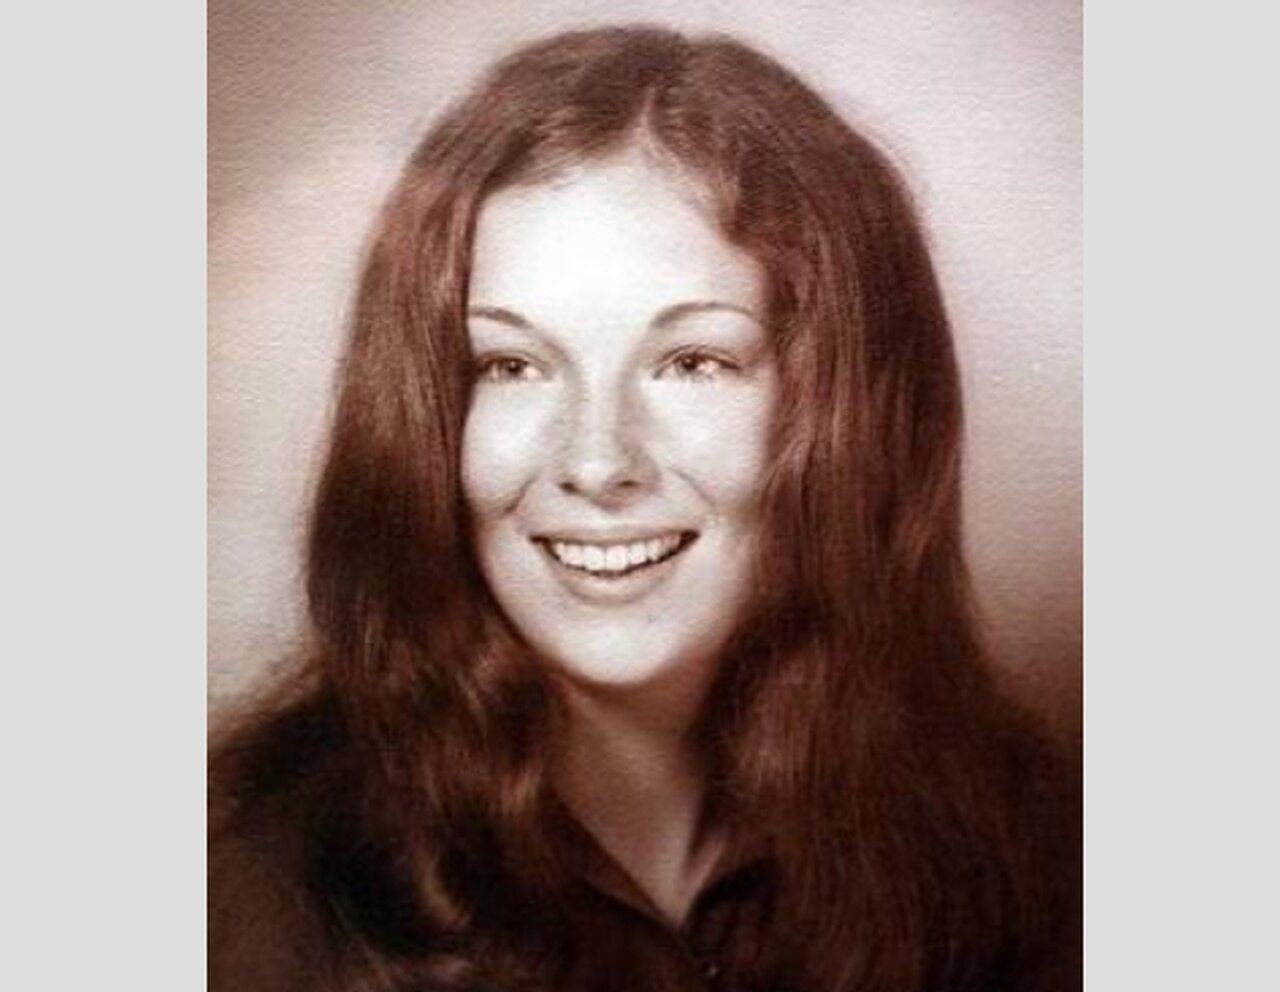 [IMAGE] Cold case killer lived normal life after he robbed victim of hers in 1975: family